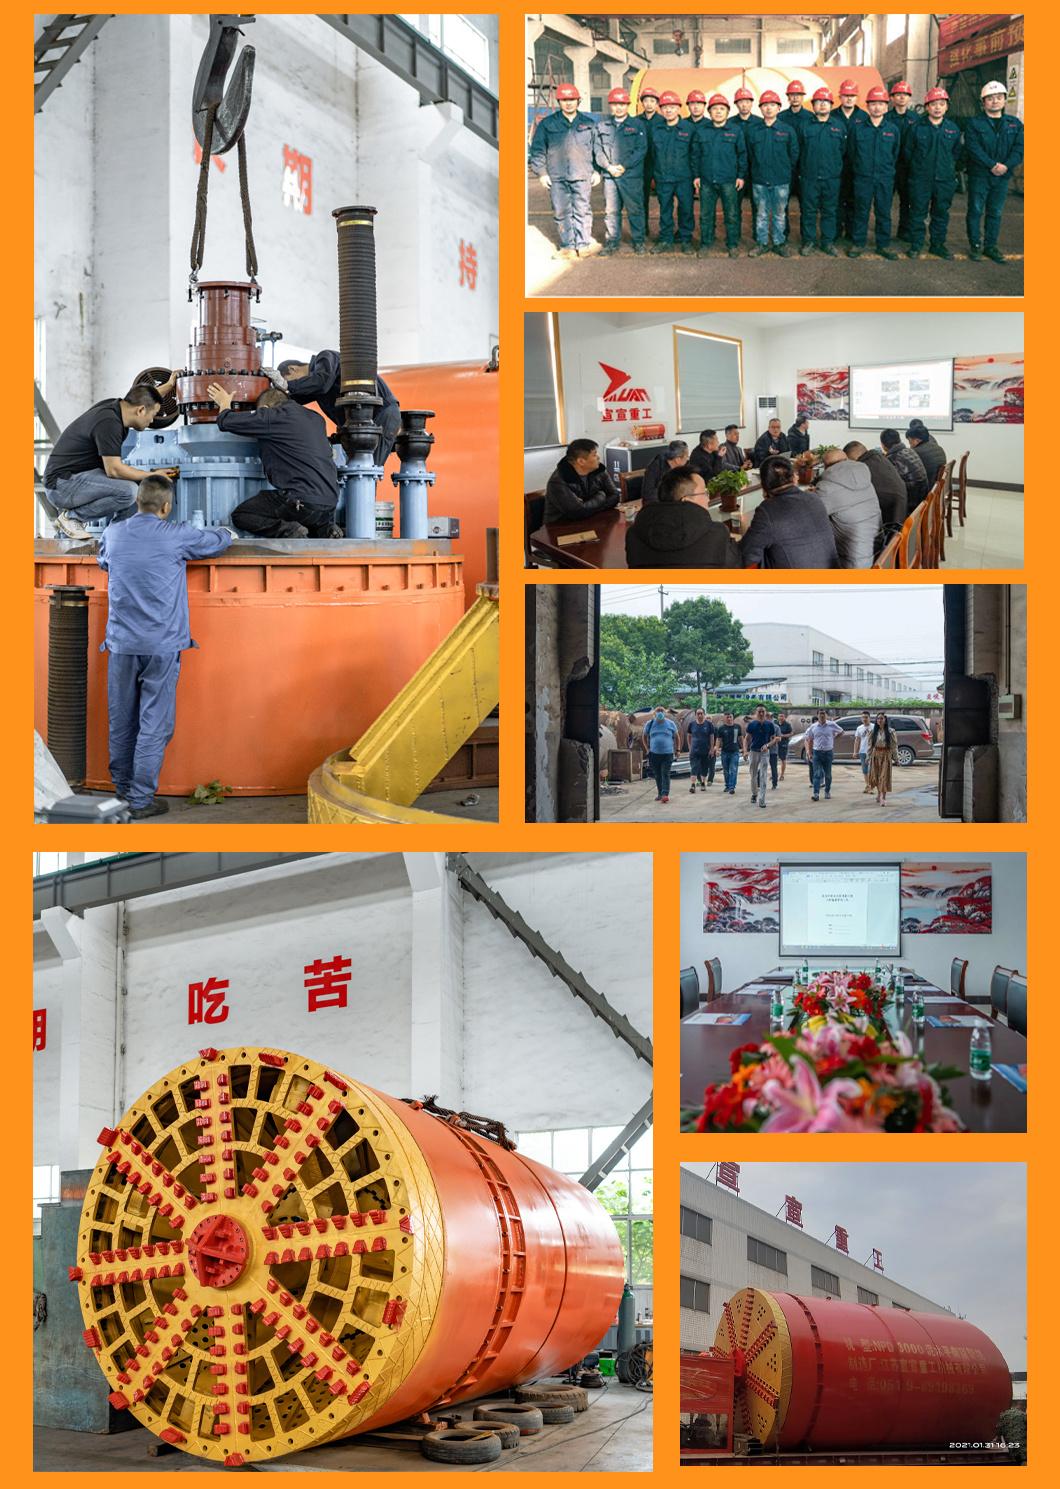 Hot Sale Popular Trenchless Project Ysd3000 Rock Pipe Jacking Machine for Rcc